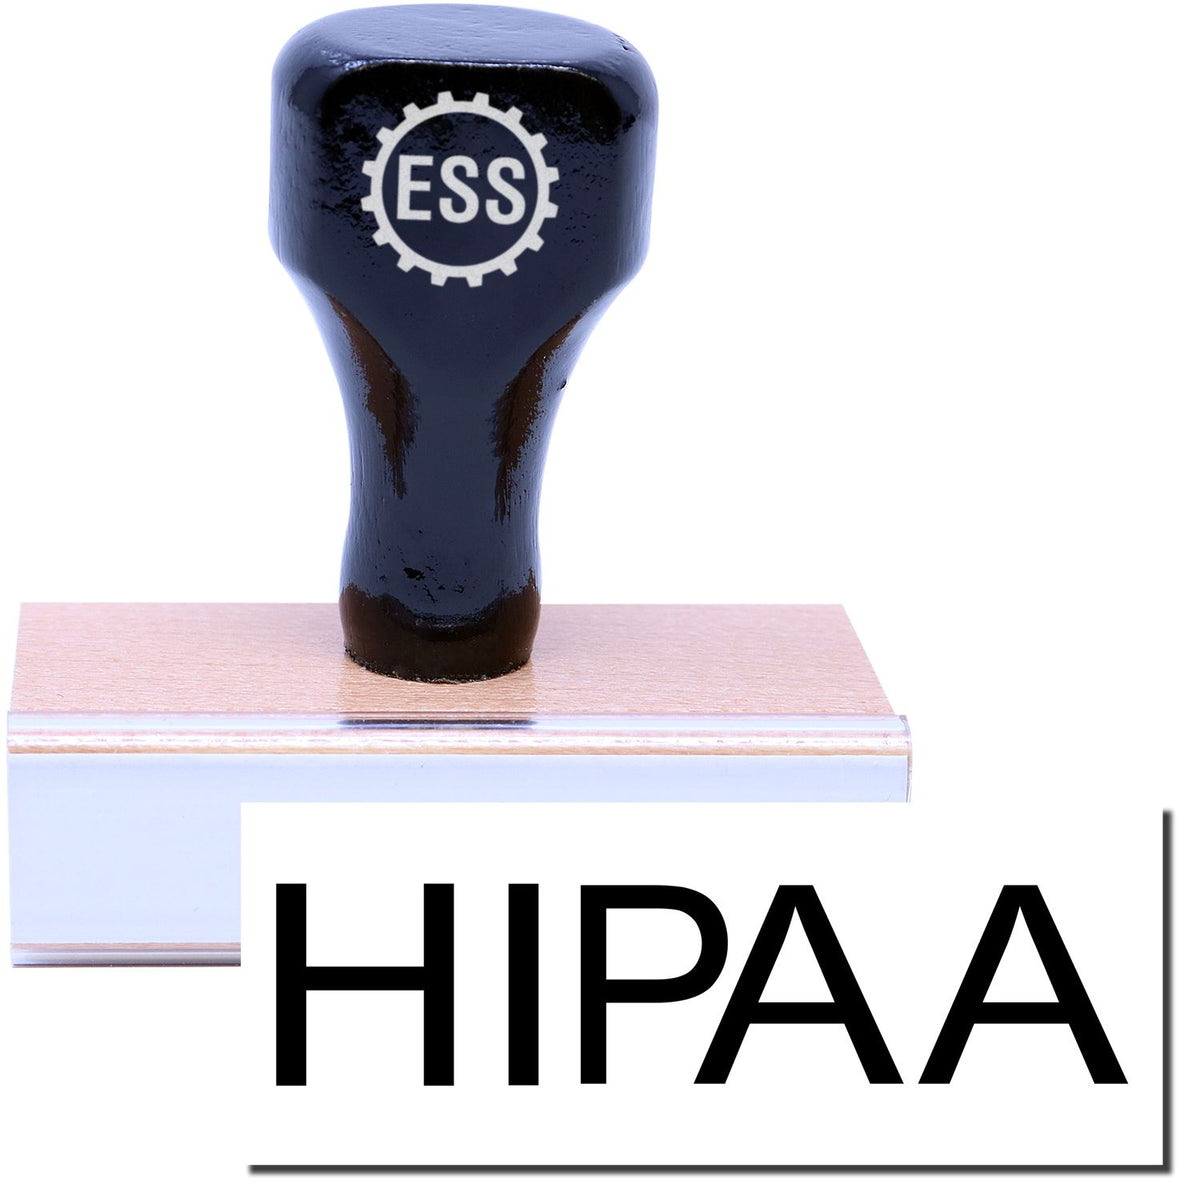 A stock office medical rubber stamp with a stamped image showing how the text &quot;HIPAA&quot; is displayed after stamping.